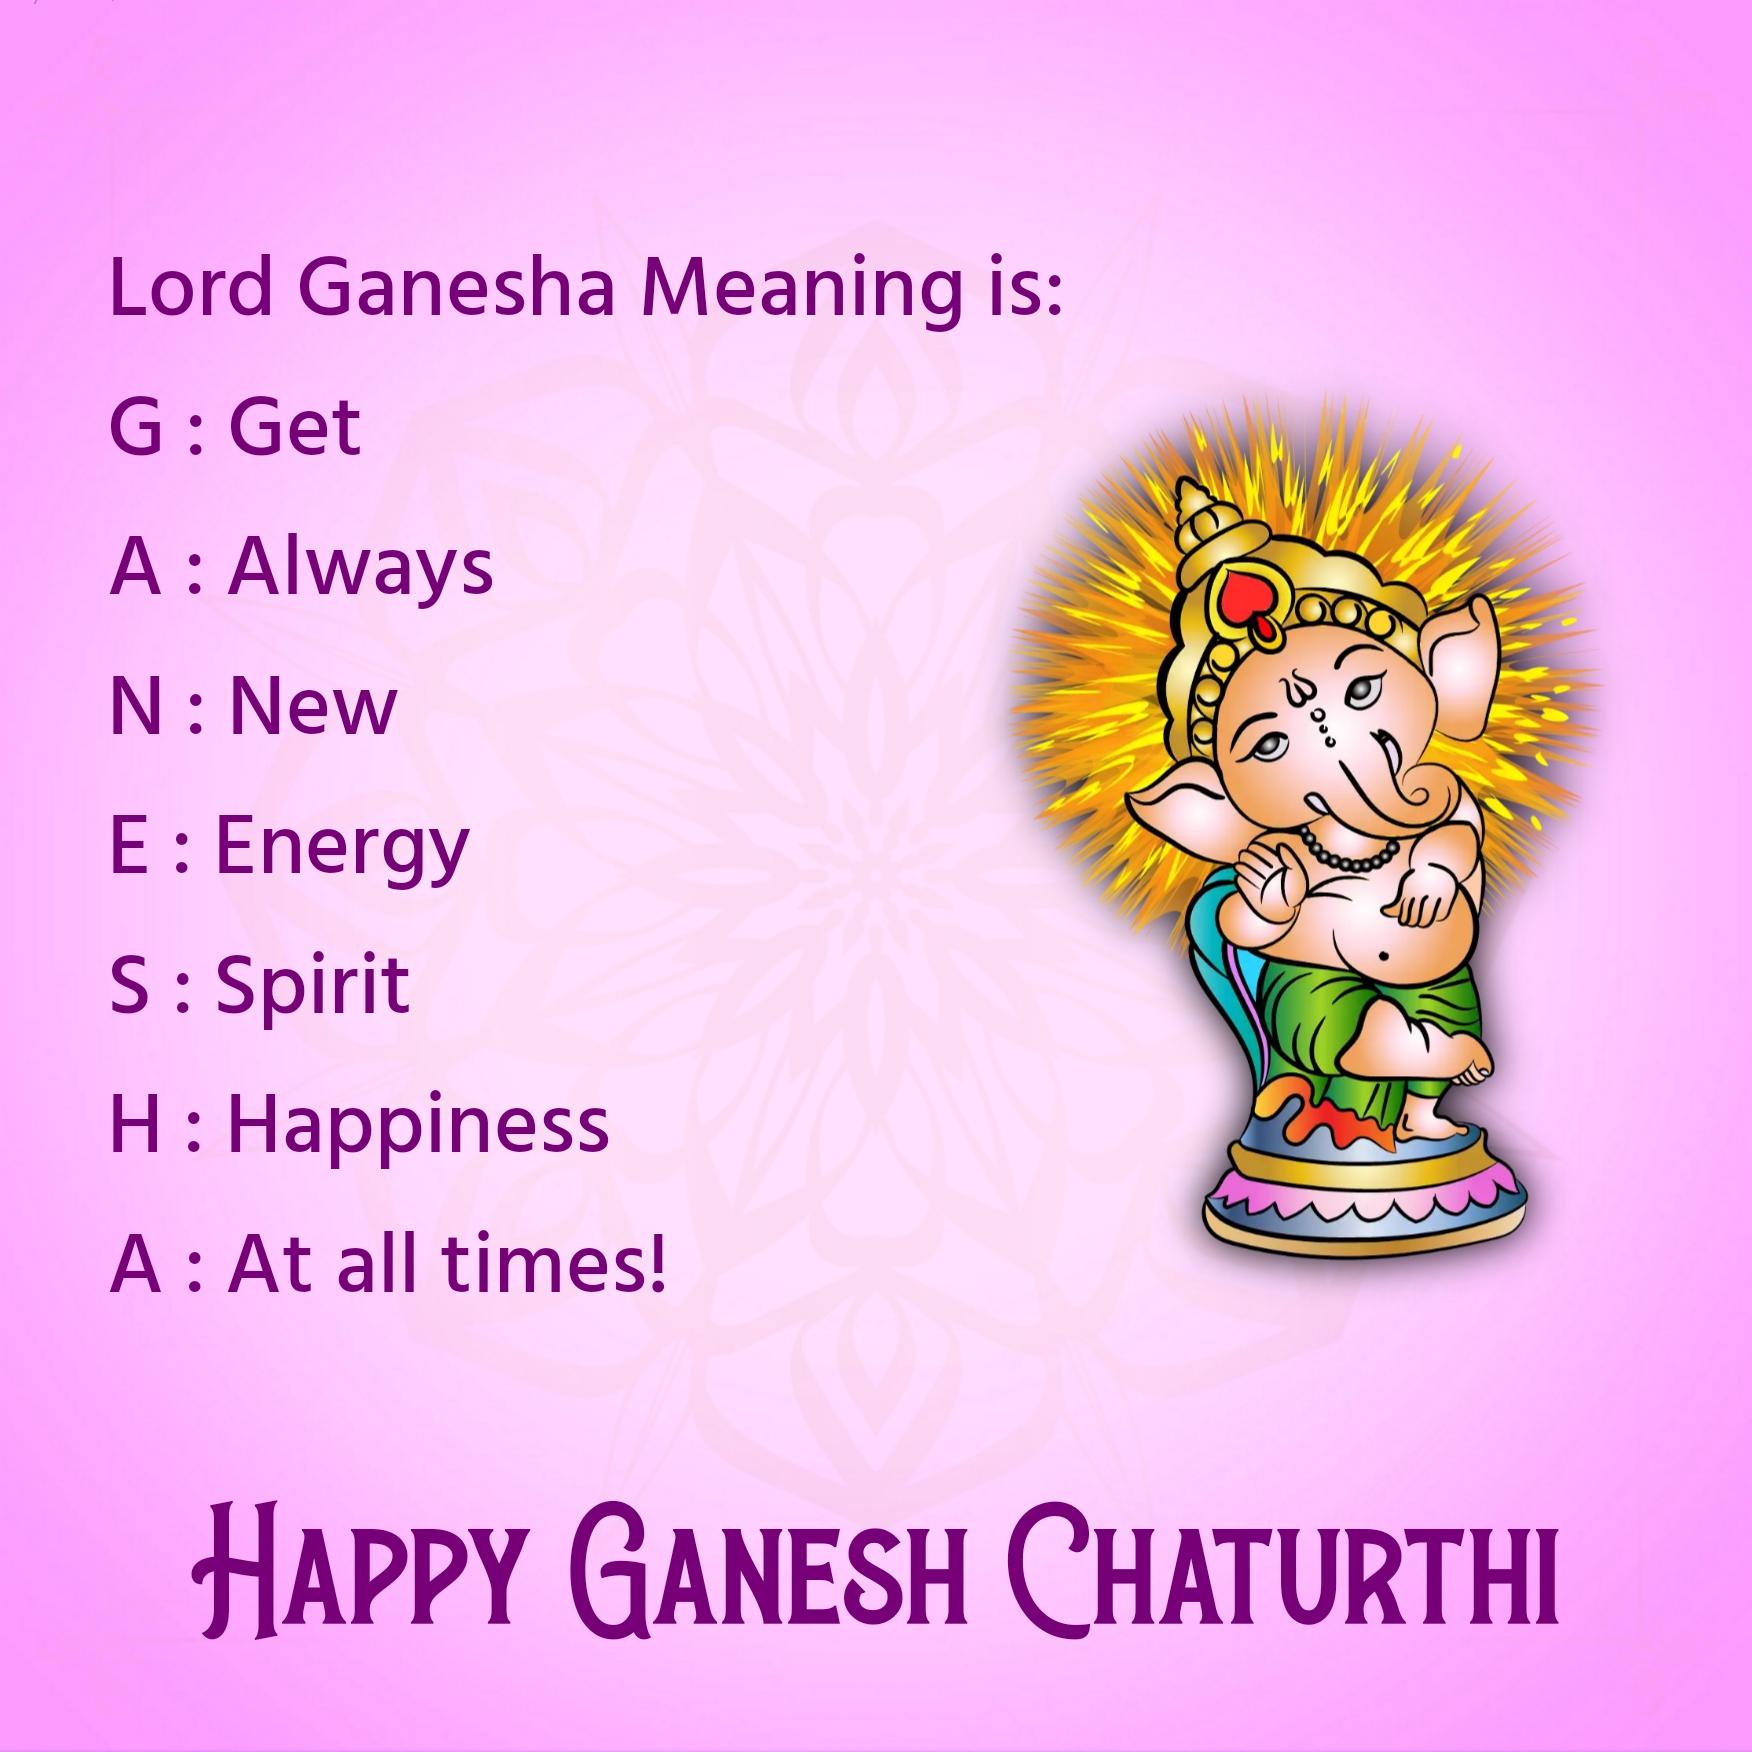 Lord Ganesha Meaning is